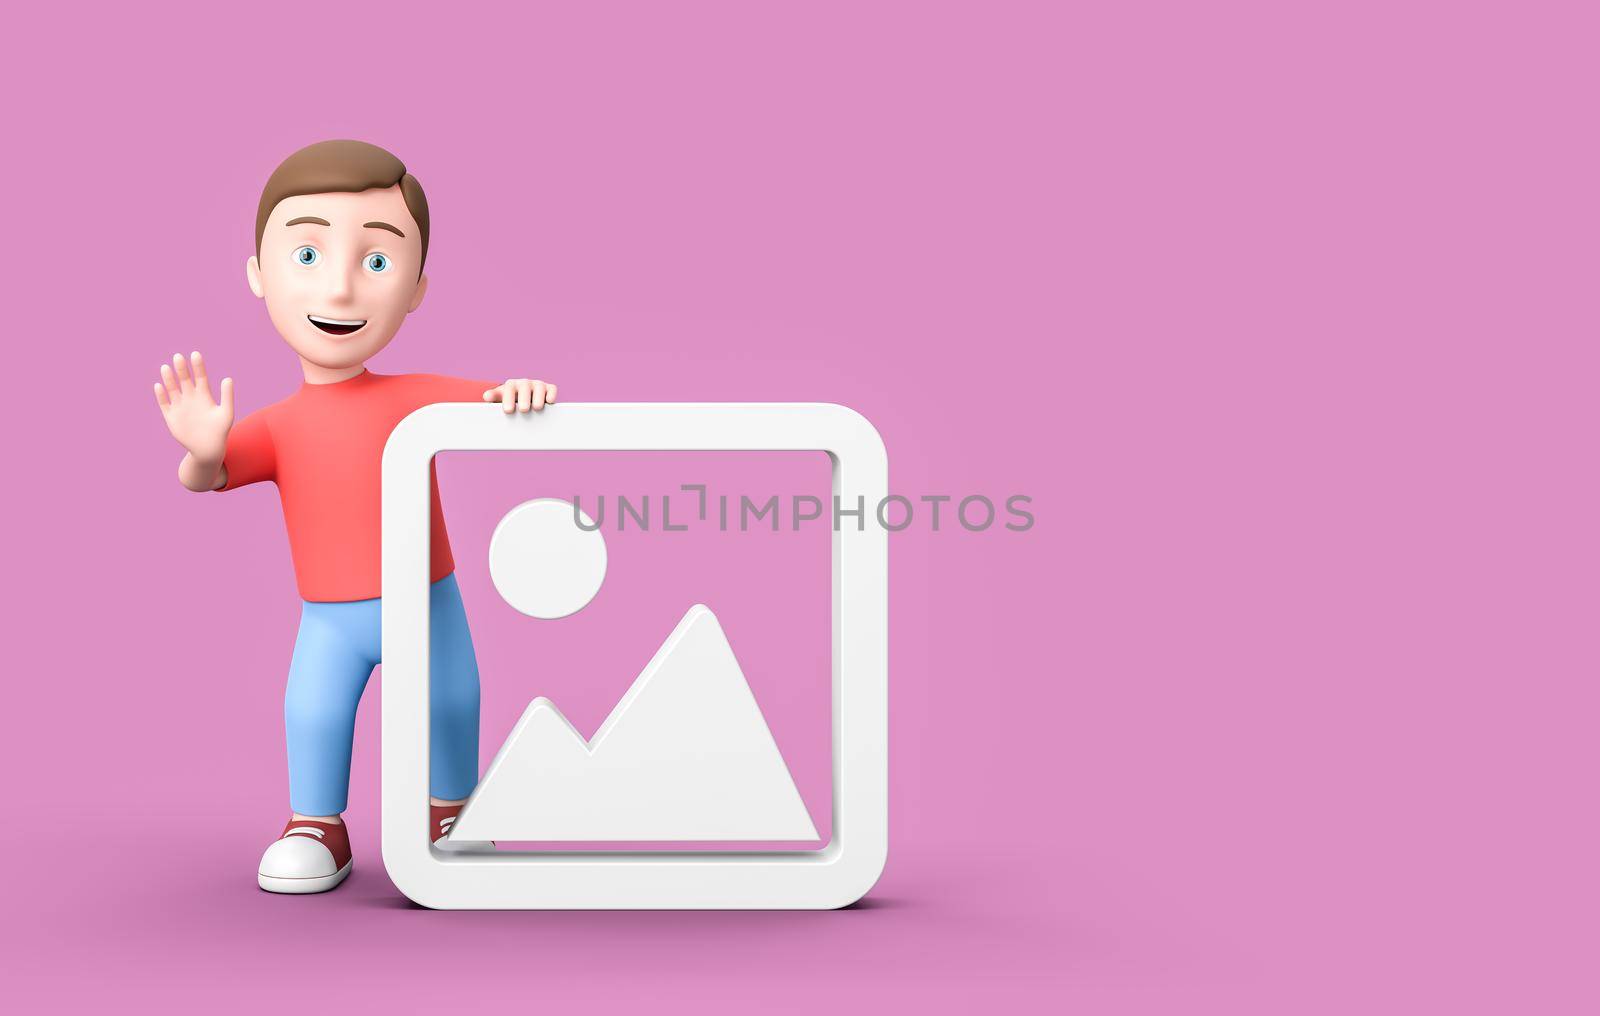 Happy Young Kid 3D Cartoon Character with White Picture Image Symbol Shape on Purple Background with Copy Space 3D Illustration